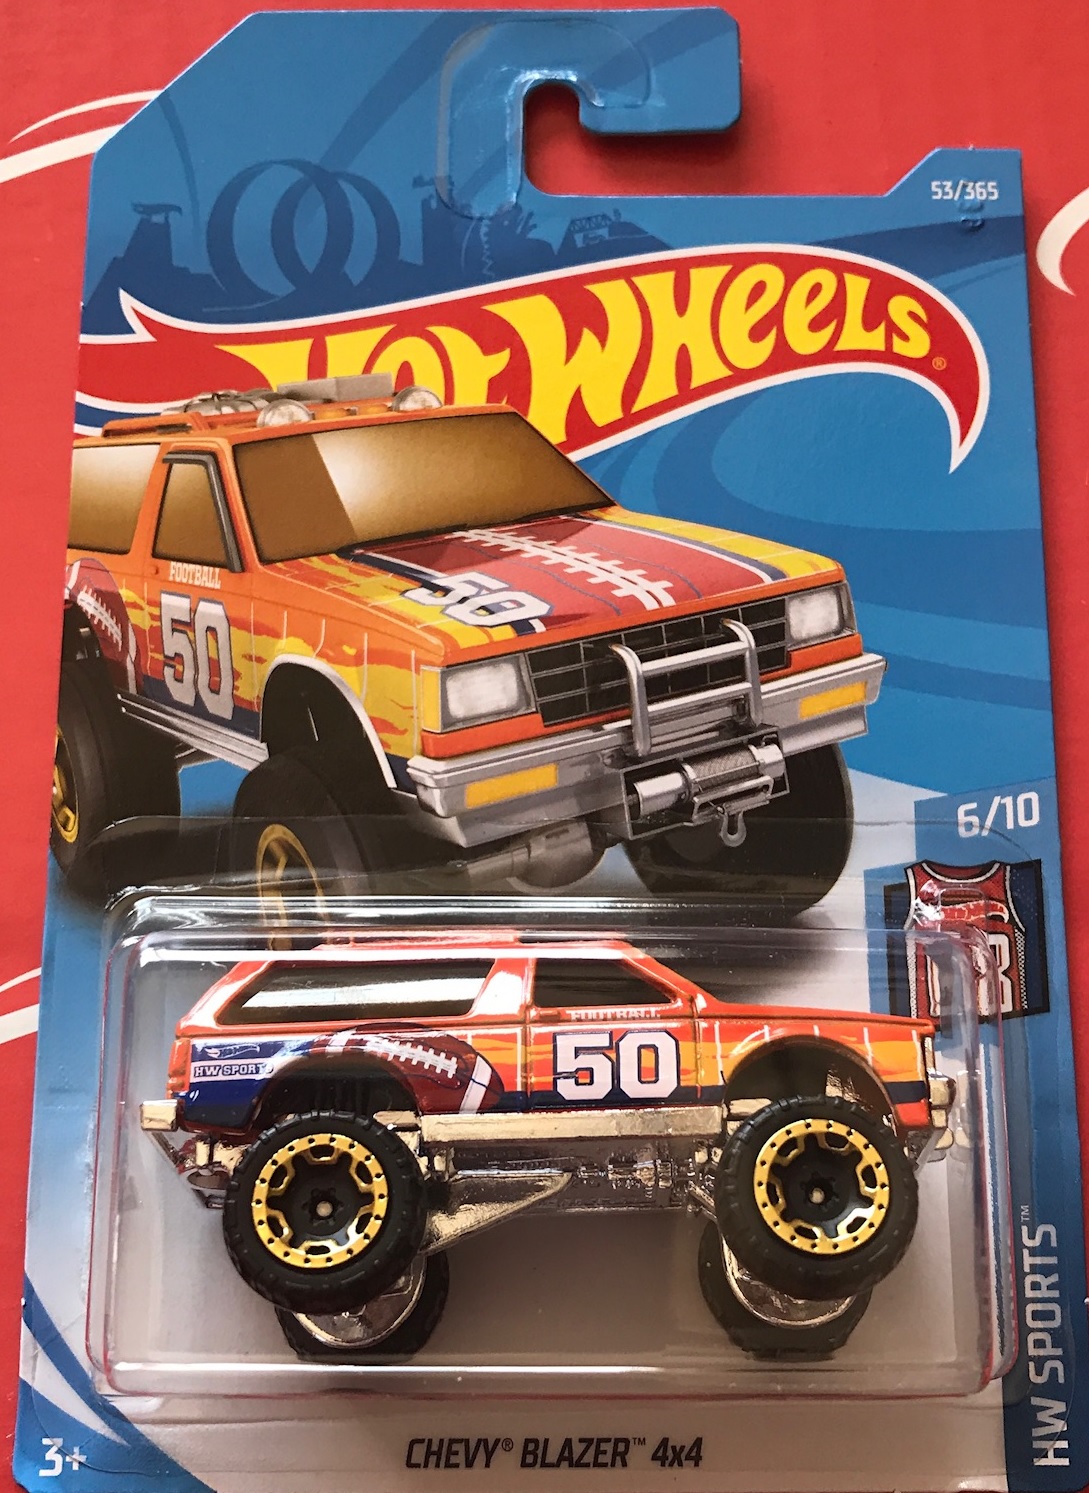 Details about   Hot Wheels Chevy Blazer 4x4 HW Sports #6/10 Die-Cast 1:64 Scale Boys 3 & Up New 